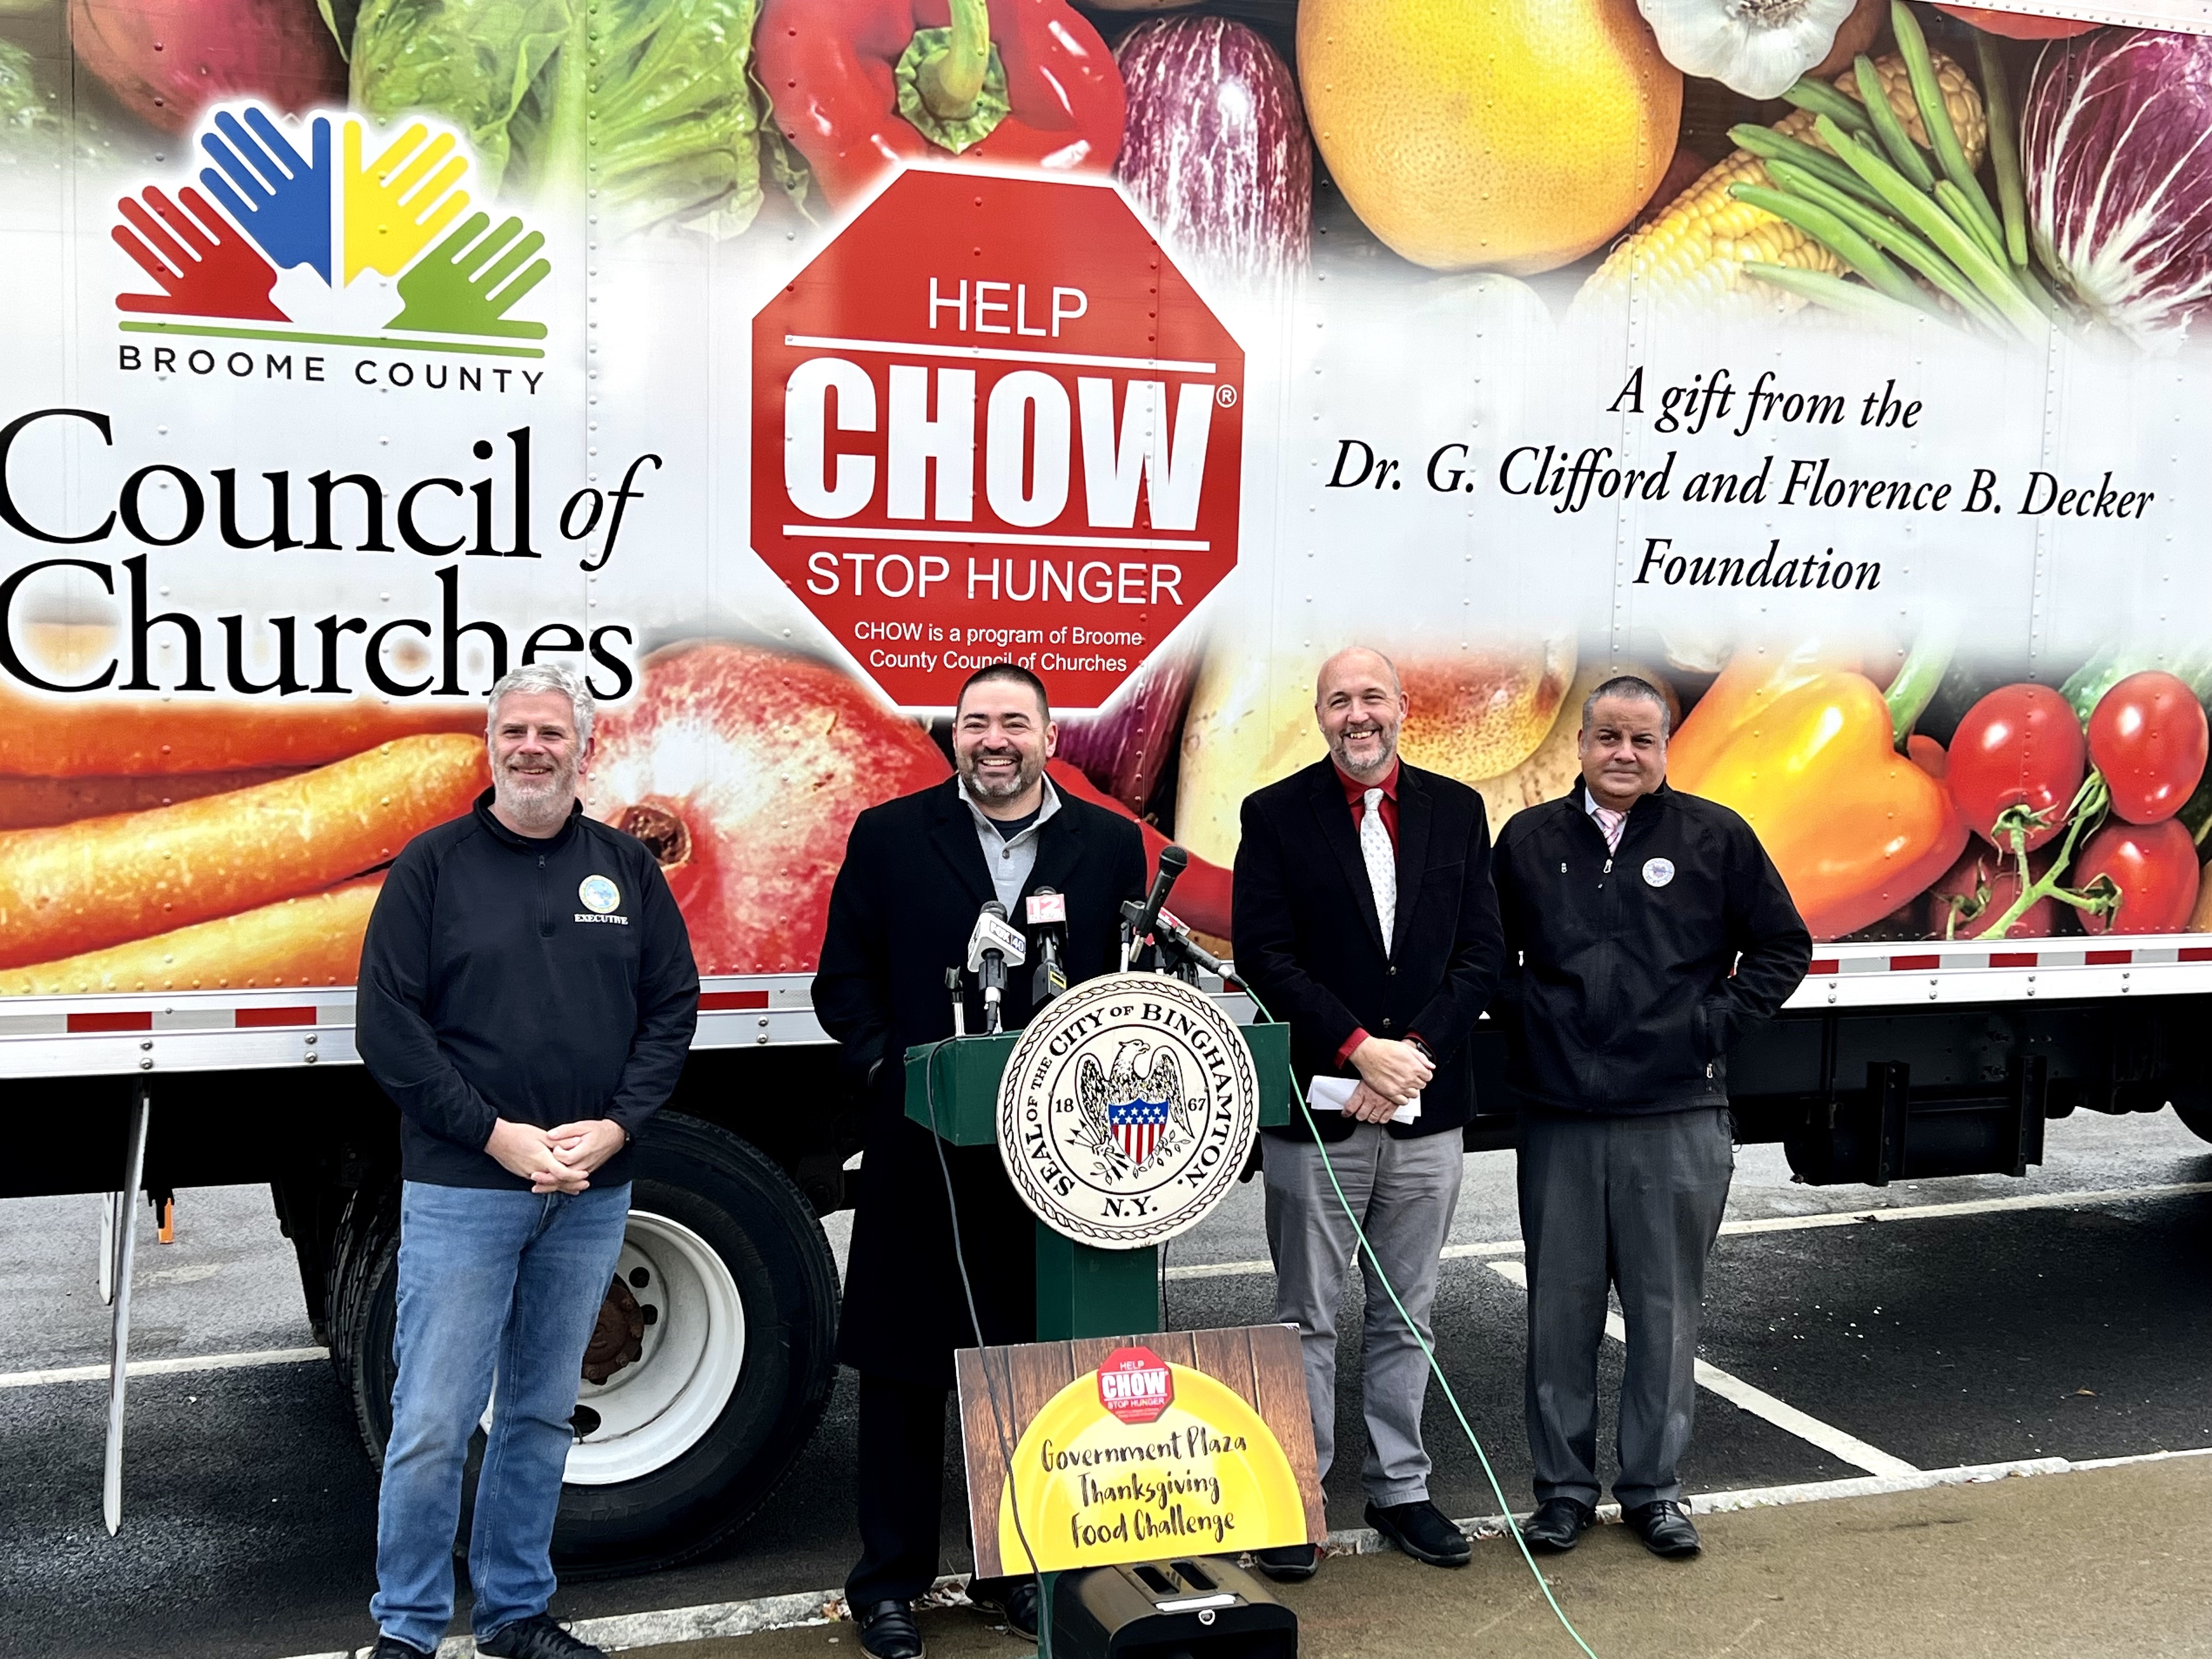 The Greater Broome County Community Donates Large To Food-A-Bago